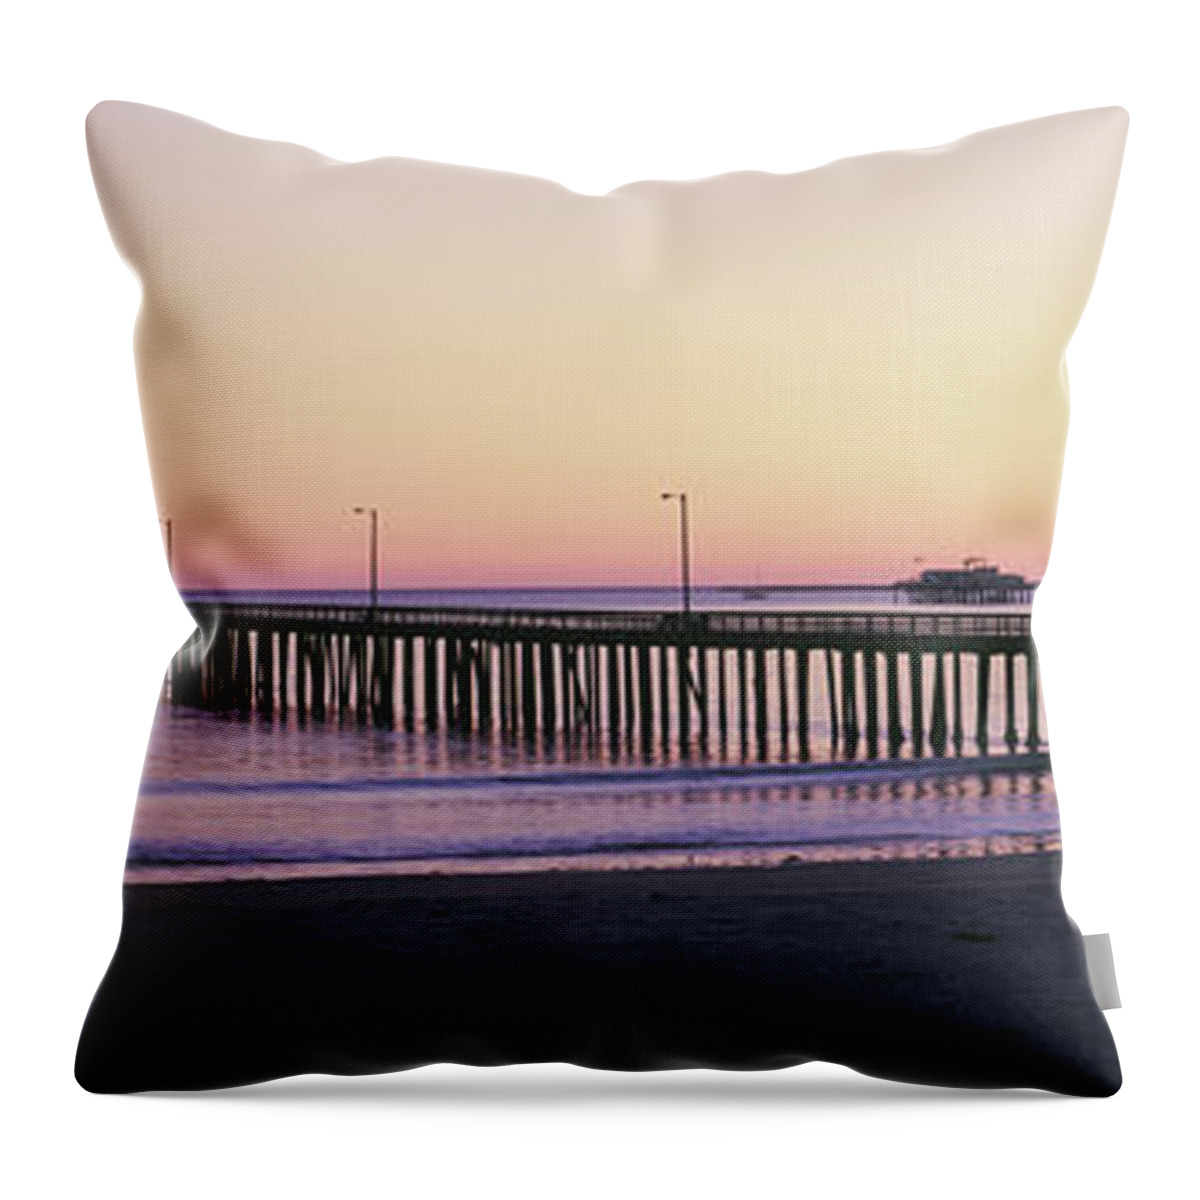 Photography Throw Pillow featuring the photograph Pier At Sunset, Avila Beach Pier, San by Panoramic Images